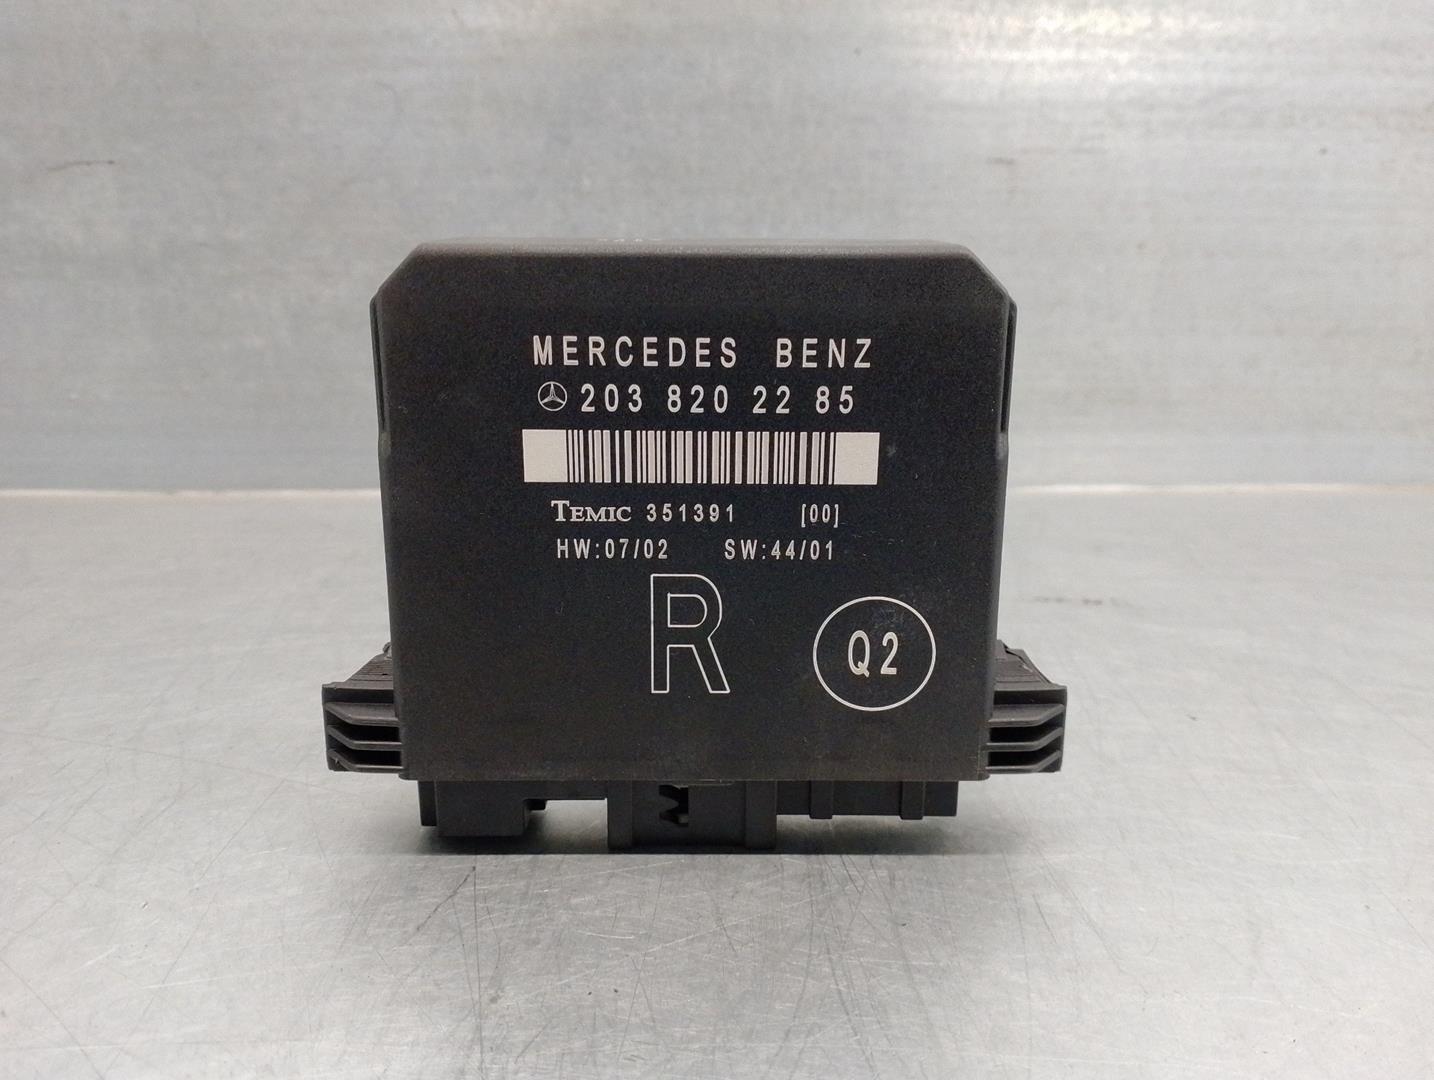 MERCEDES-BENZ C-Class W203/S203/CL203 (2000-2008) Other Control Units 2038202285, 351391, TEMIC 19915641